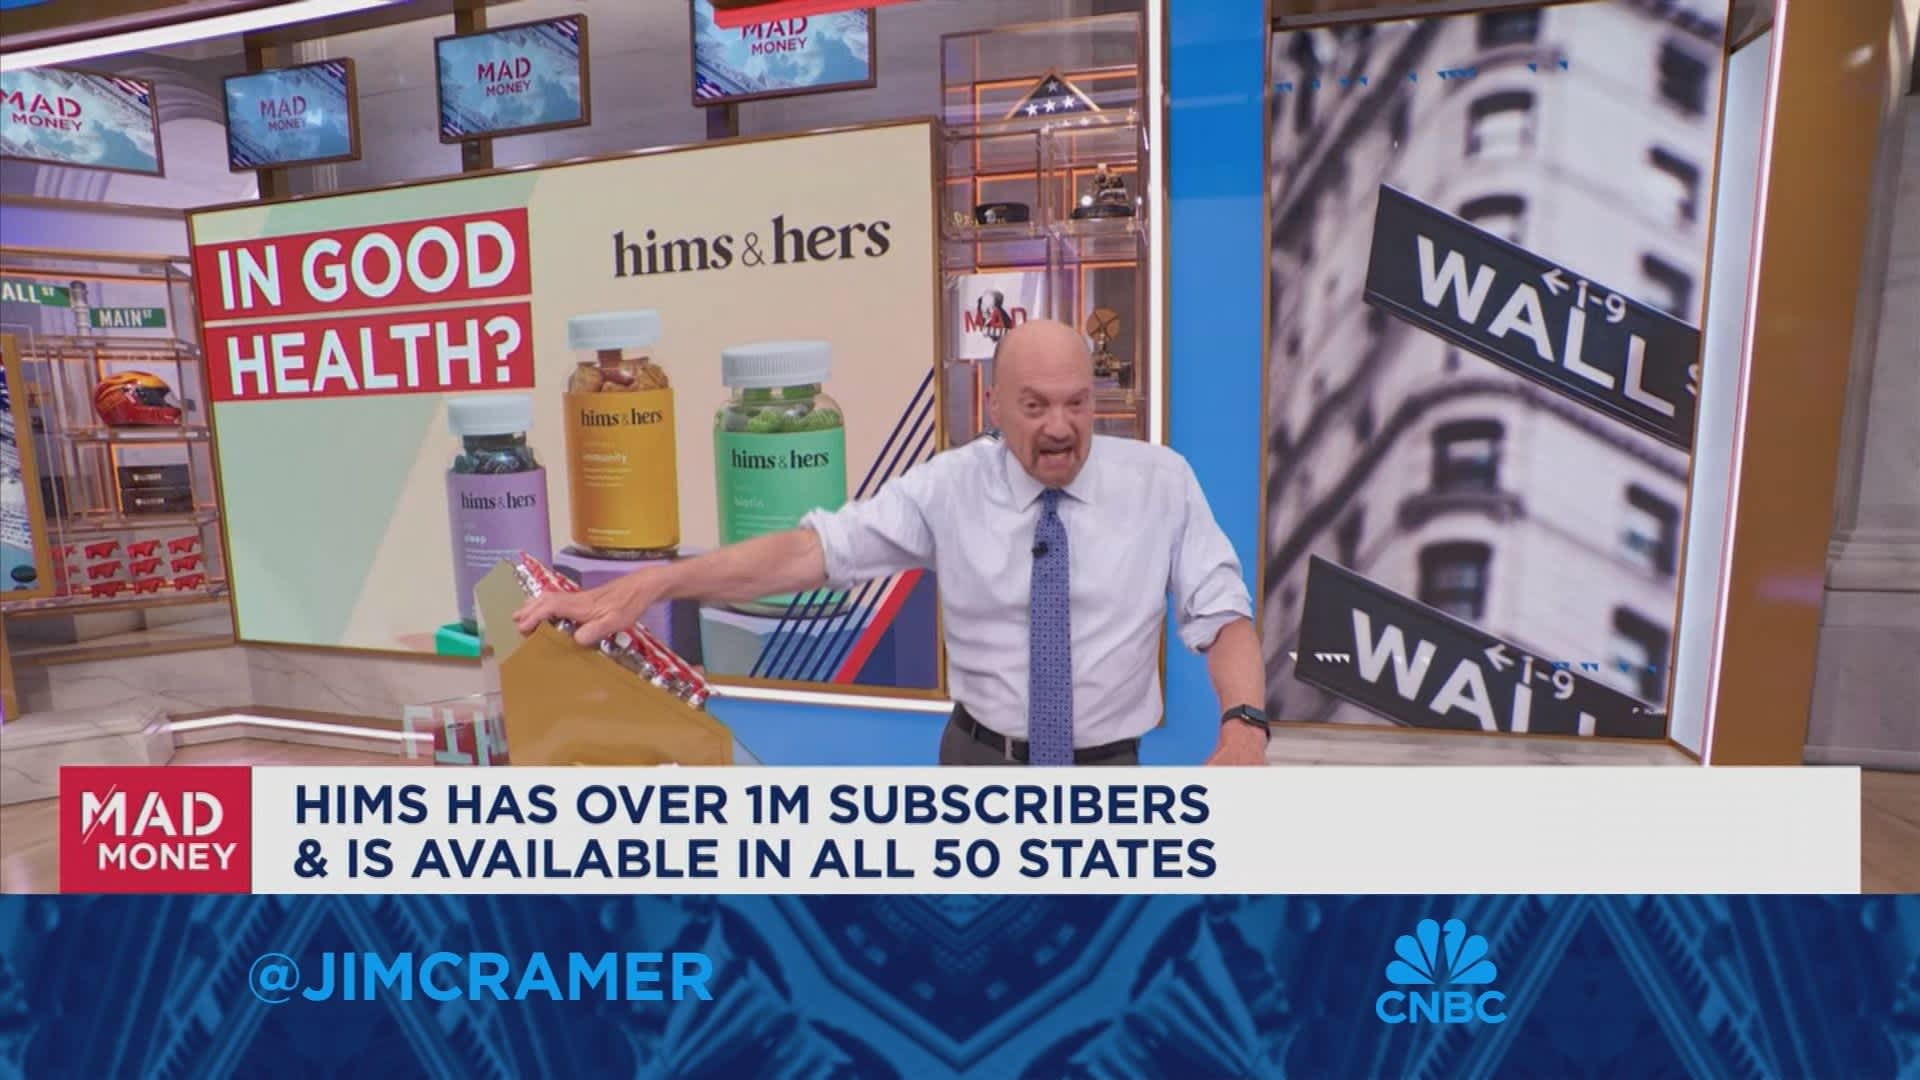 Don't place your hopes on Hims & Hers GLP-1 business, says Jim Cramer